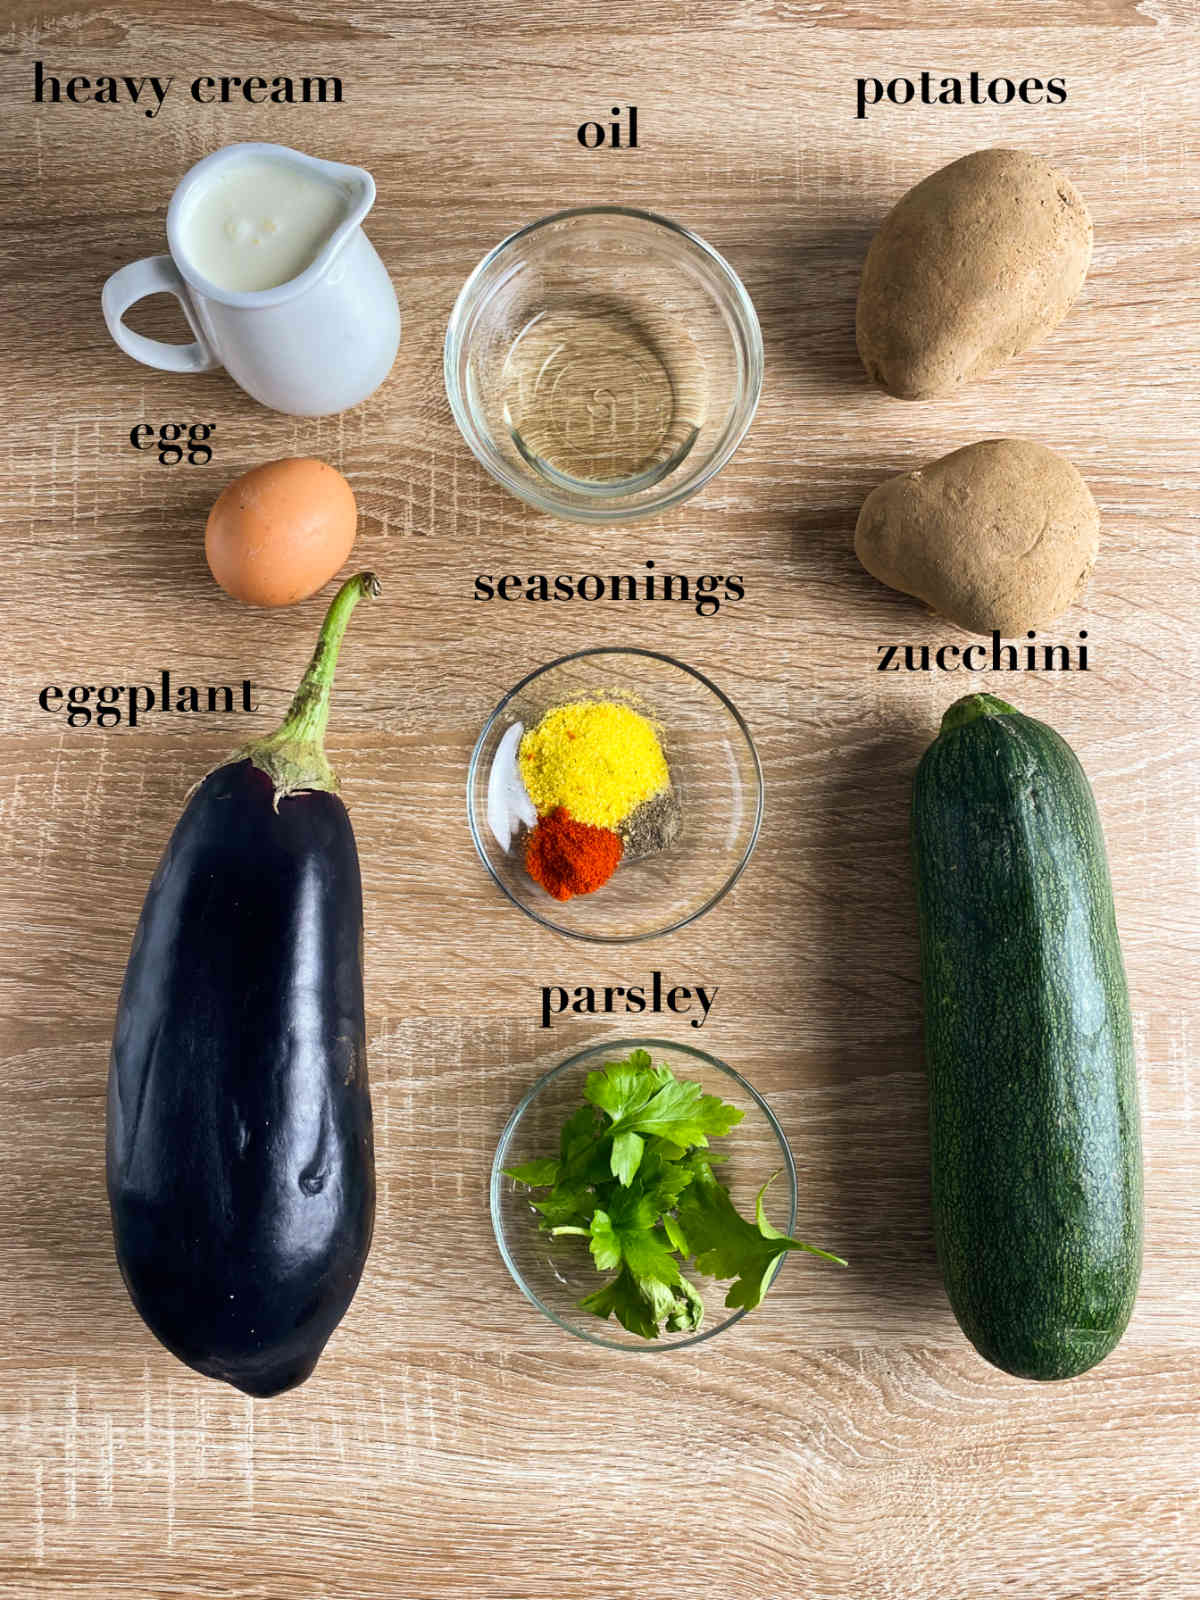 Ingredients for moussaka on a wood background (heavy cream, oil, potatoes, egg, seasonings, zucchini, eggplant and parsley).